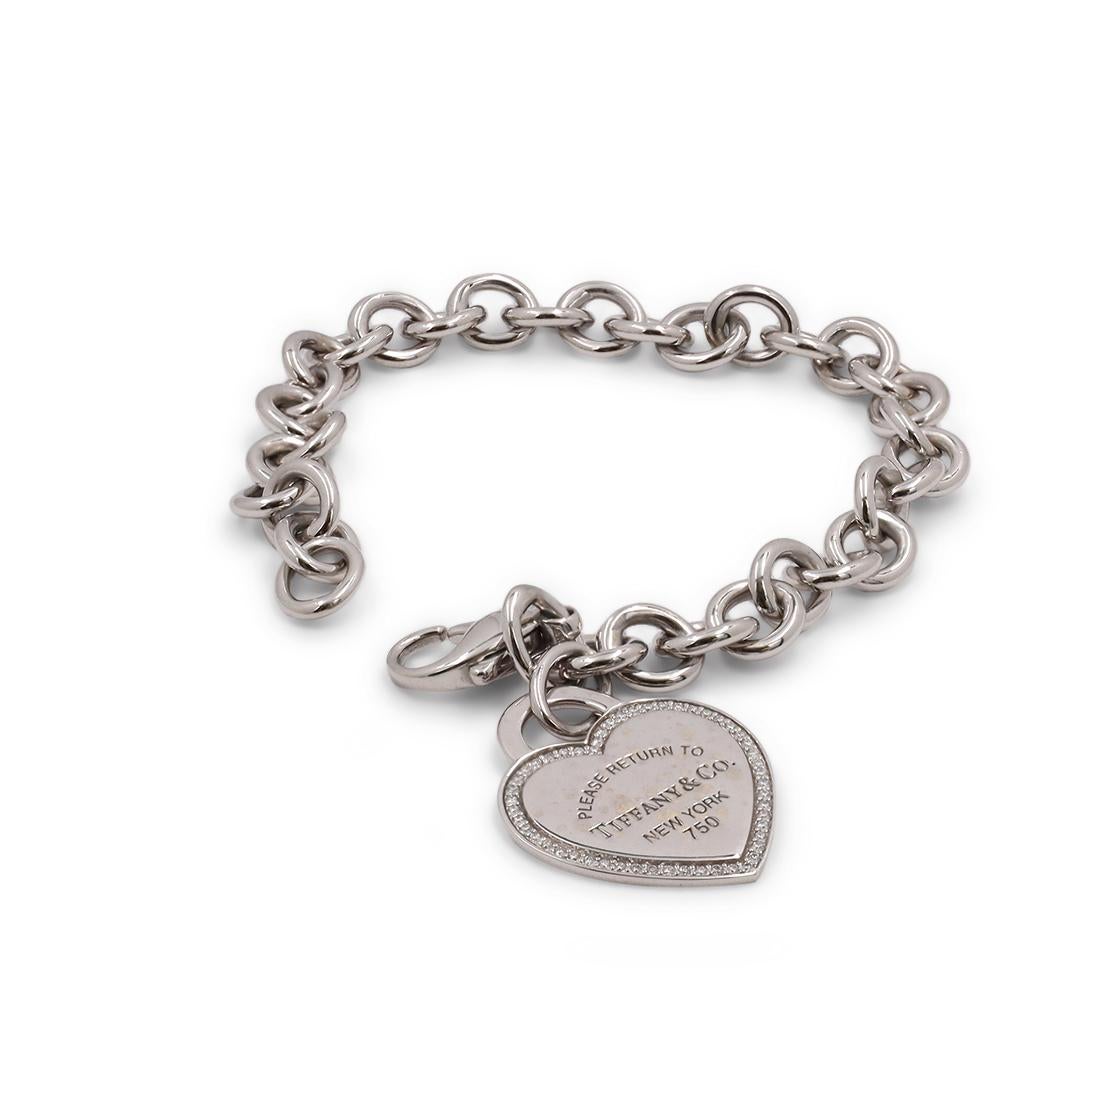 Authentic Tiffany & Co. 'Return to Tiffany' heart bracelet crafted in 18 karat white gold featuring the signature Tiffany & Co. engraving surrounded by an estimated 0.20 carats of round brilliant cut diamonds. The pendant measures 20.9mm in width x